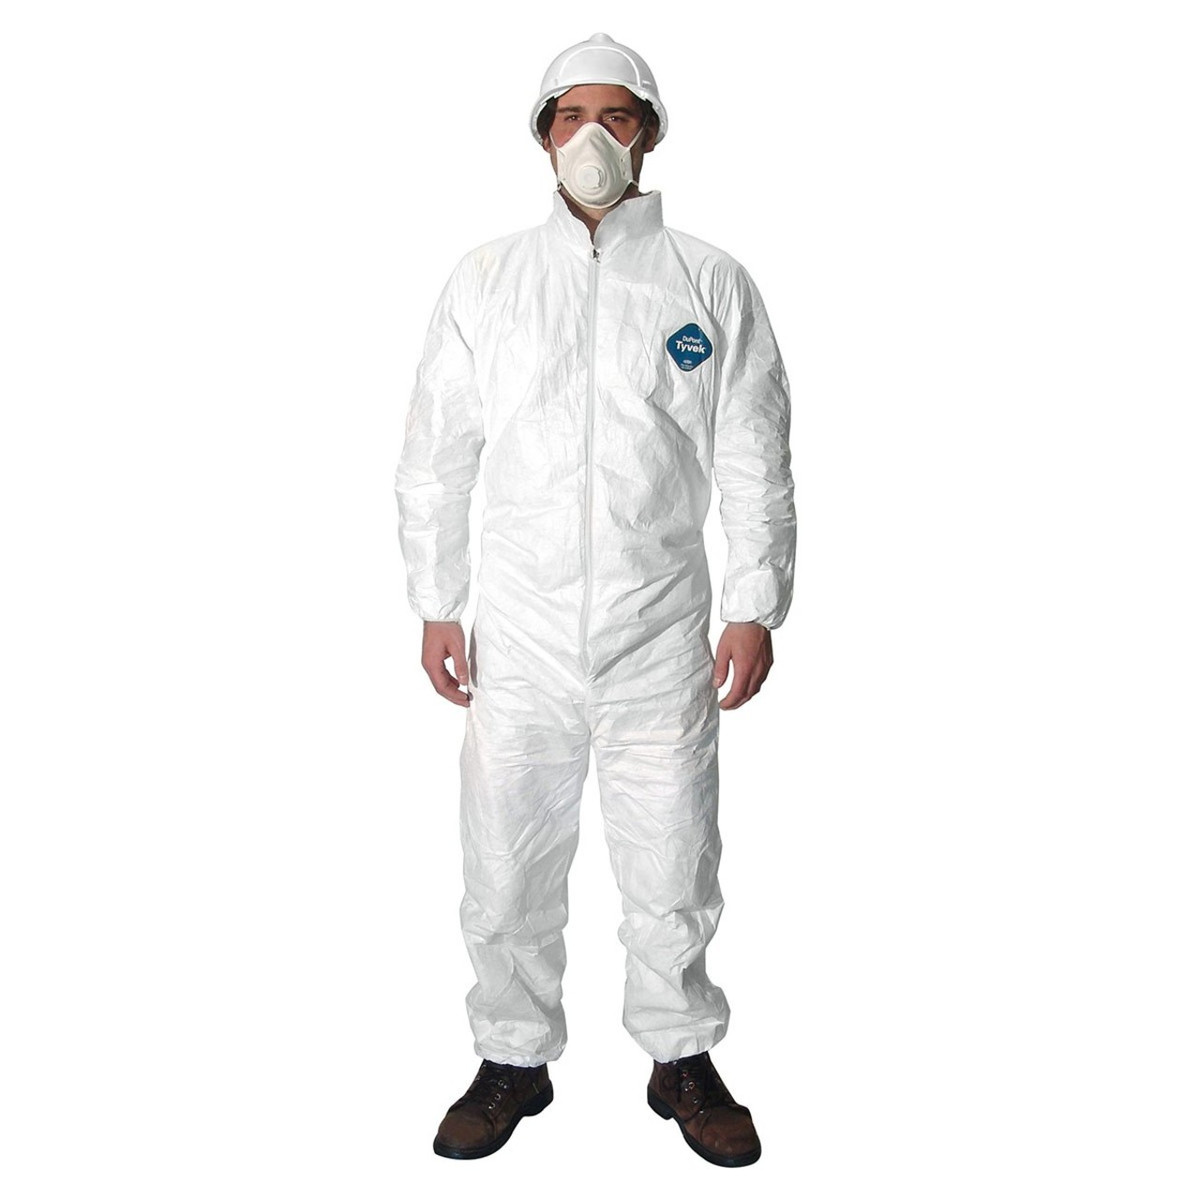 Tyvek Suits - The Best Balance of Protection, Durability, and Comfort